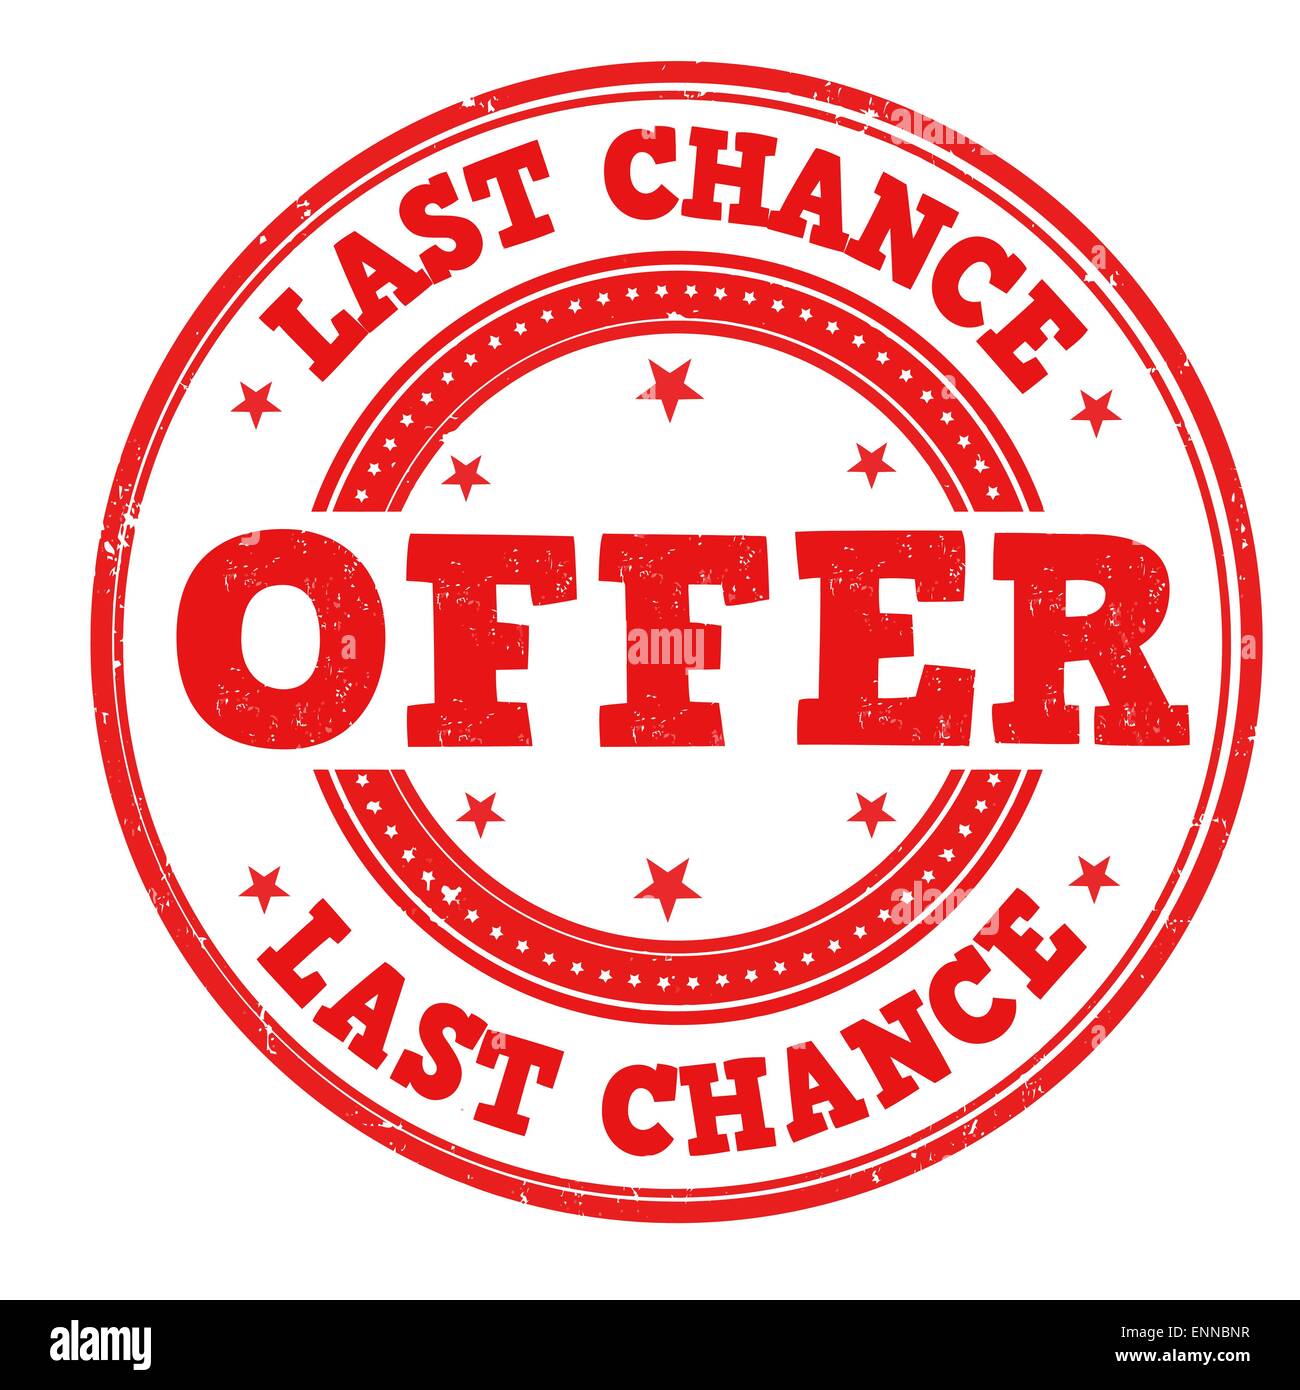 Last chance offer stamp Stock Vector